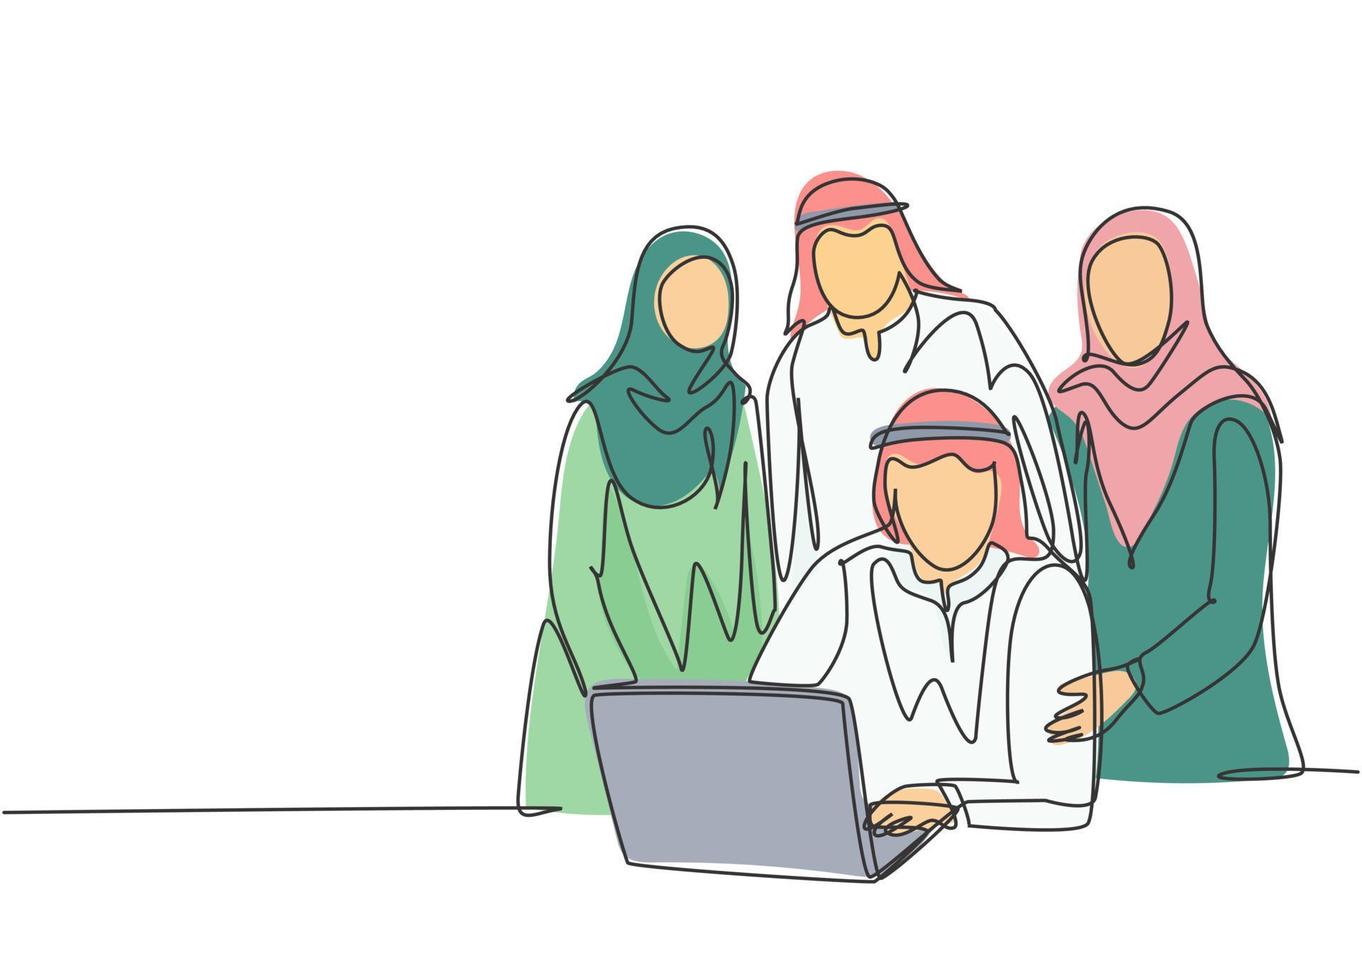 One single line drawing of young happy muslim startup team members pose together solidly. Saudi Arabia cloth shmag, kandora, headscarf, thobe, ghutra. Continuous line draw design vector illustration